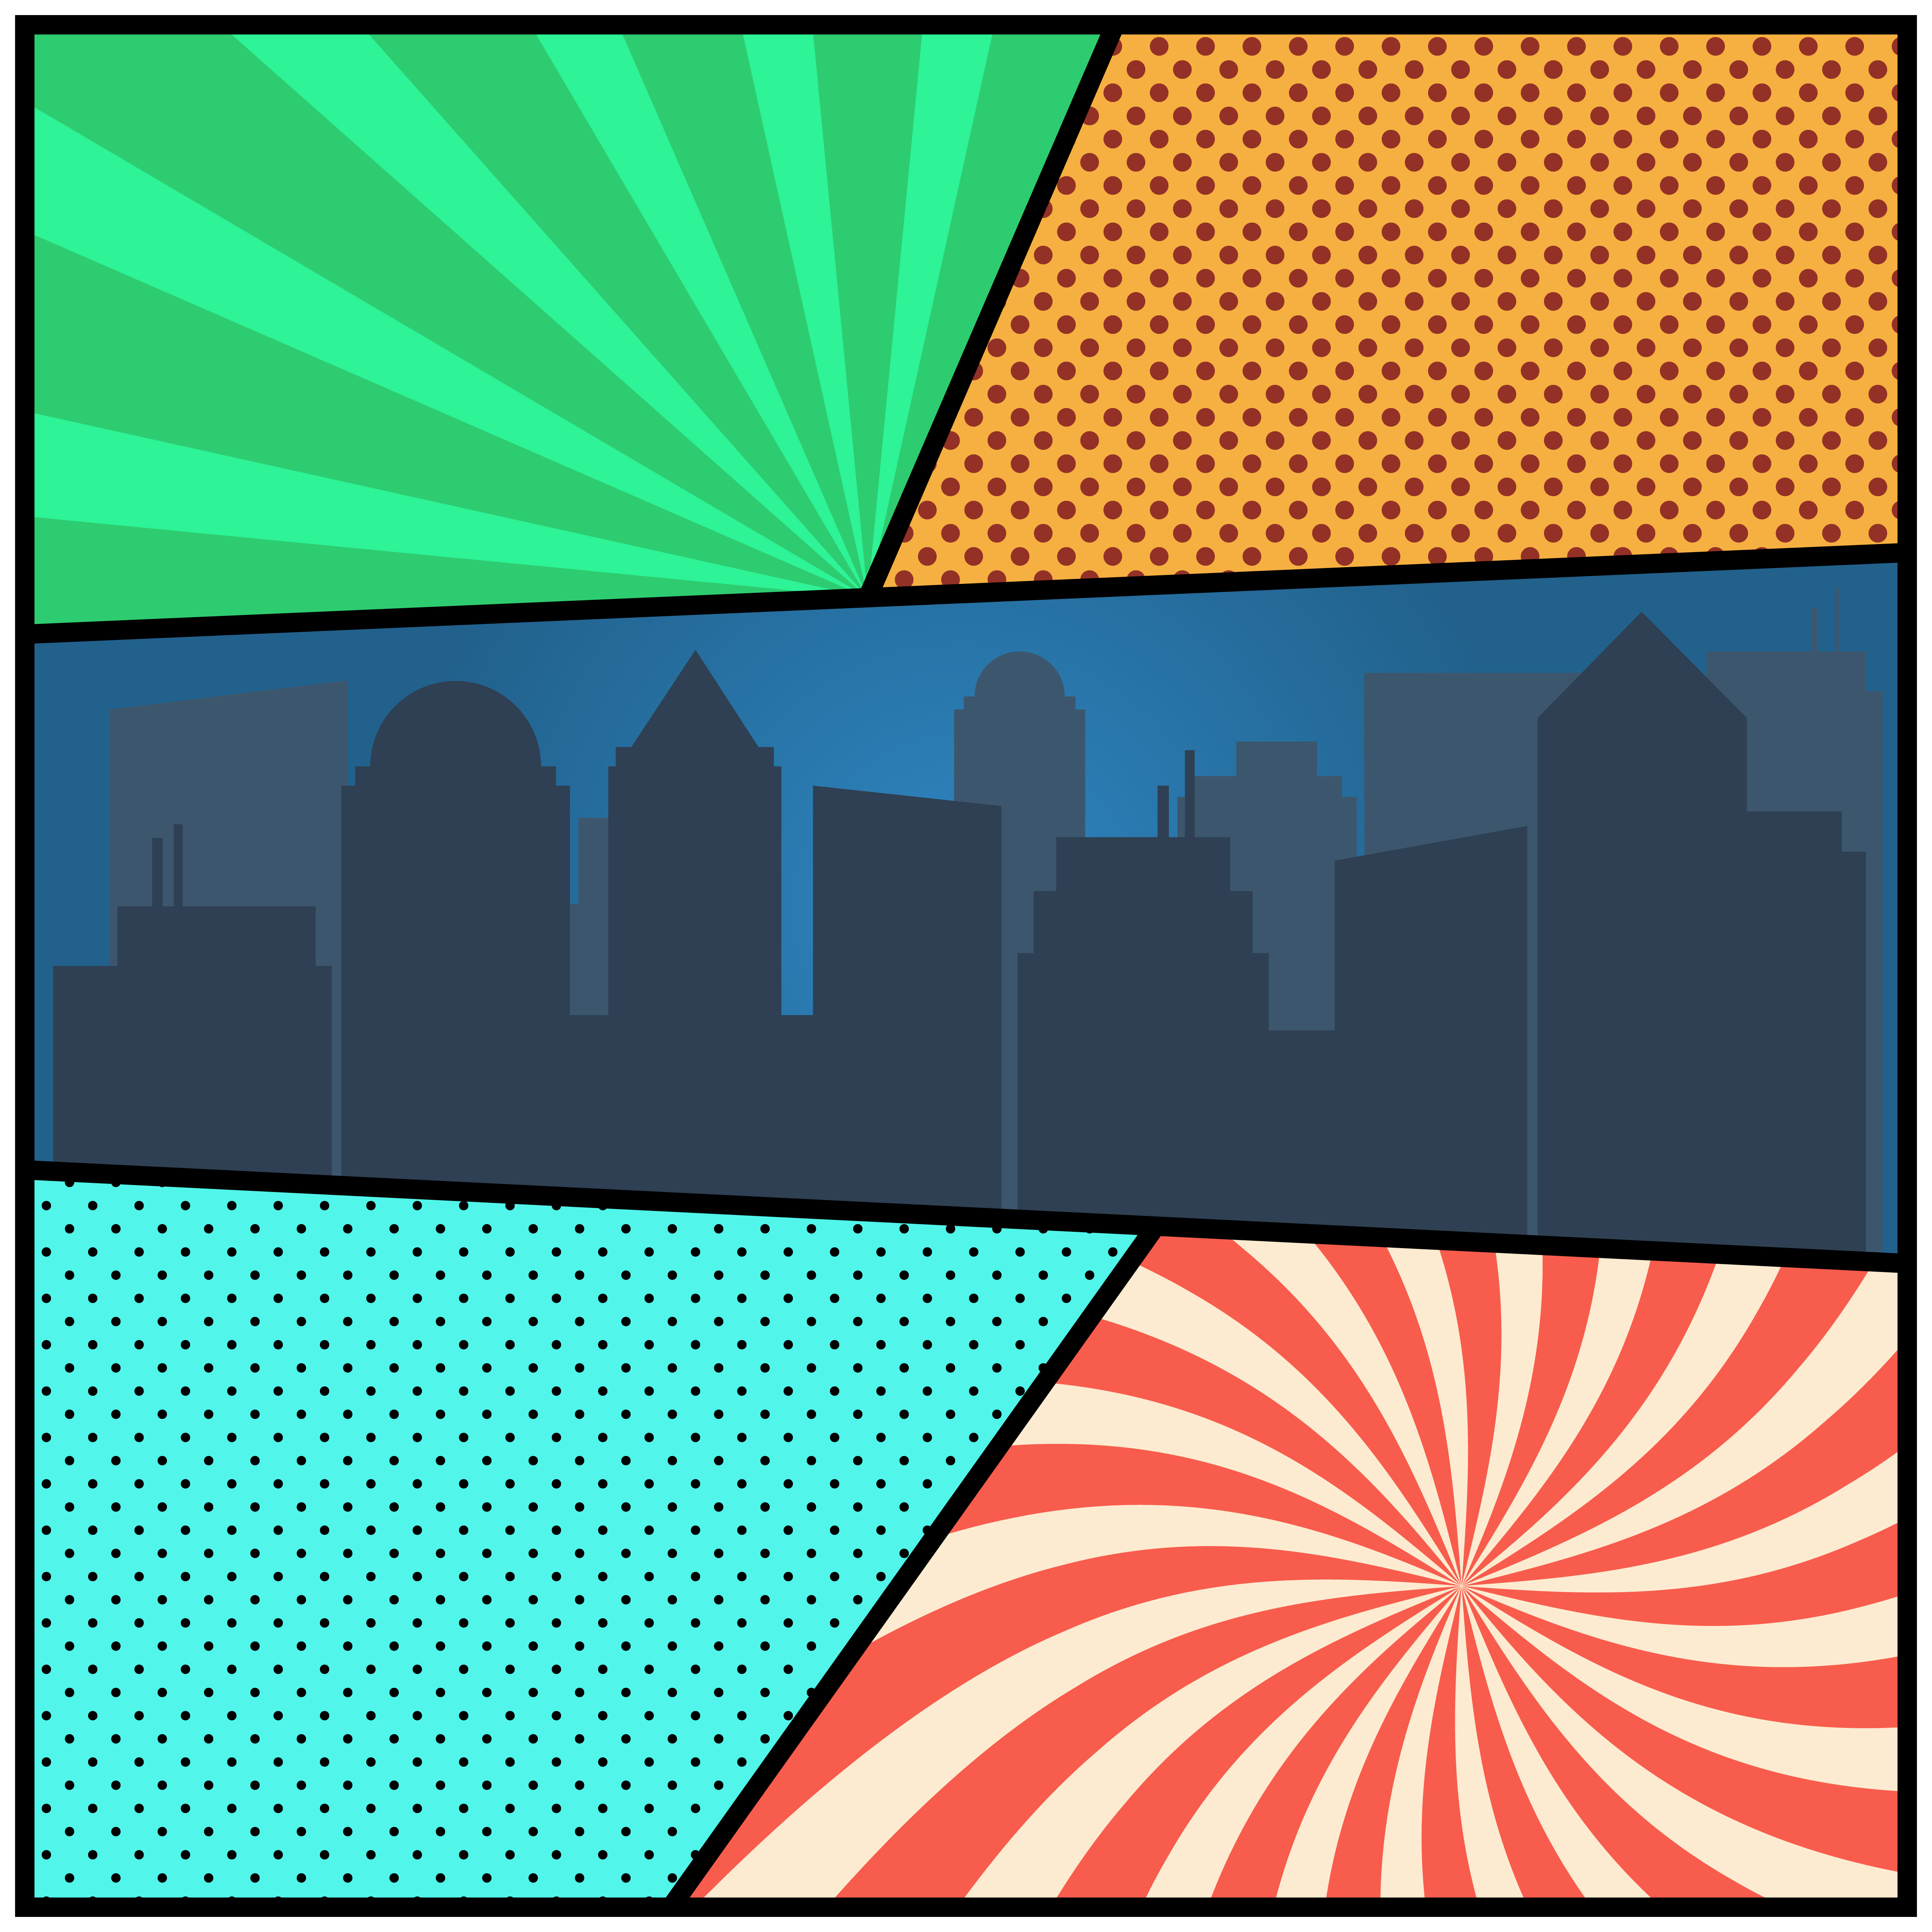 Pop art comic page template with radial backgrounds and city silhouette